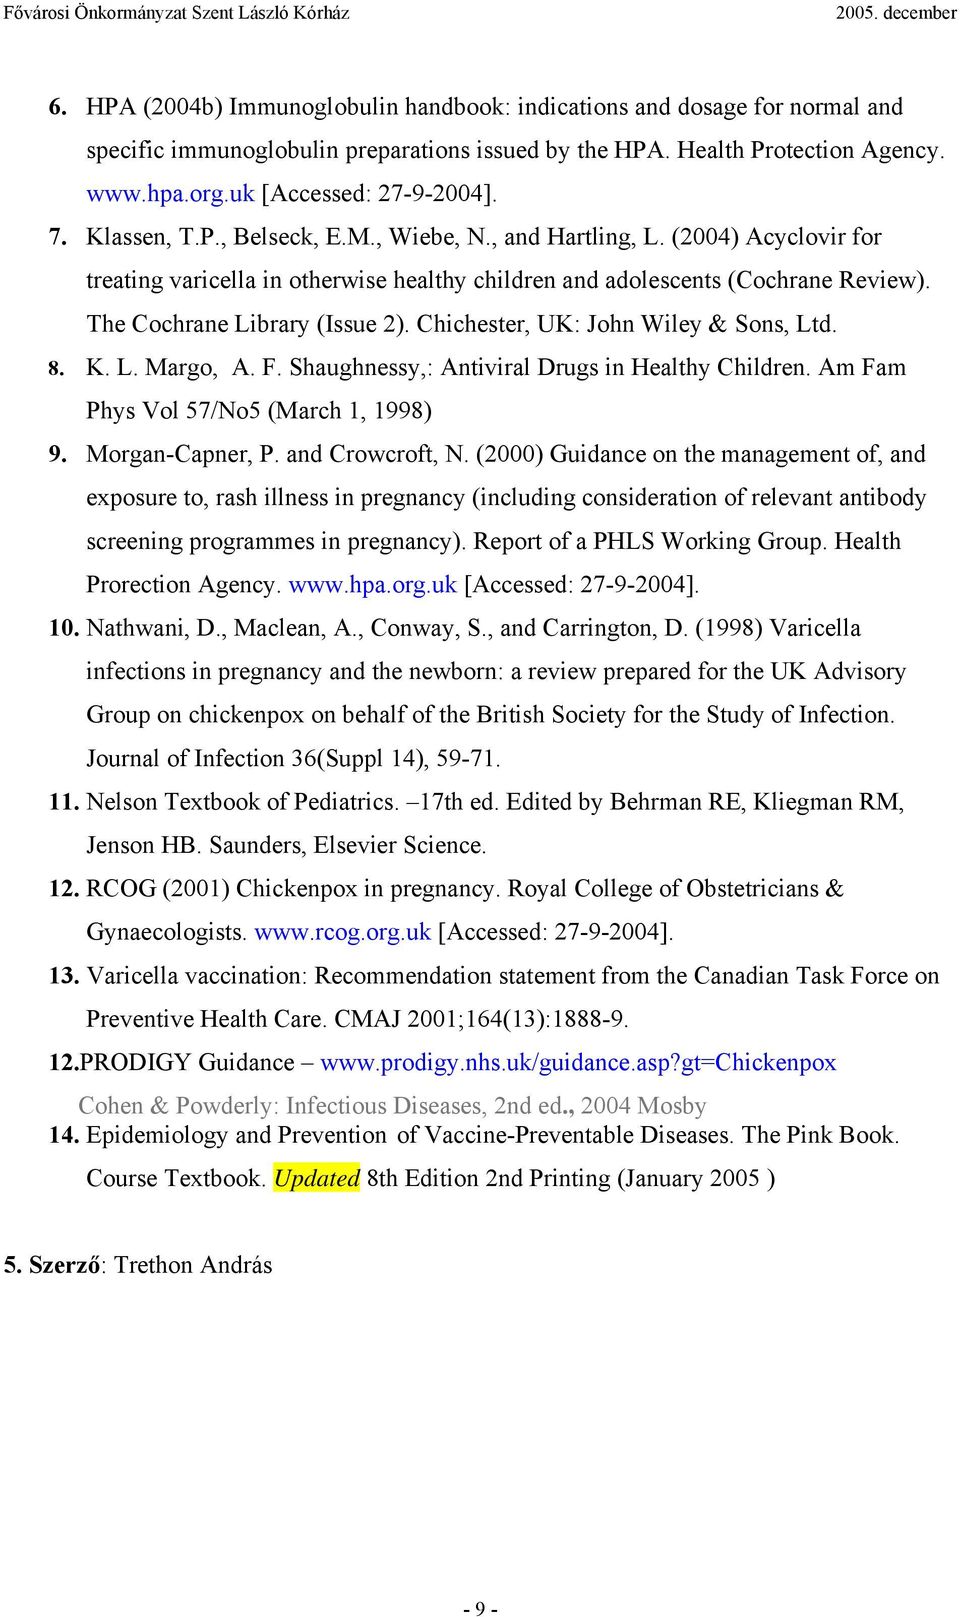 Chichester, UK: John Wiley & Sons, Ltd. 8. K. L. Margo, A. F. Shaughnessy,: Antiviral Drugs in Healthy Children. Am Fam Phys Vol 57/No5 (March 1, 1998) 9. Morgan-Capner, P. and Crowcroft, N.